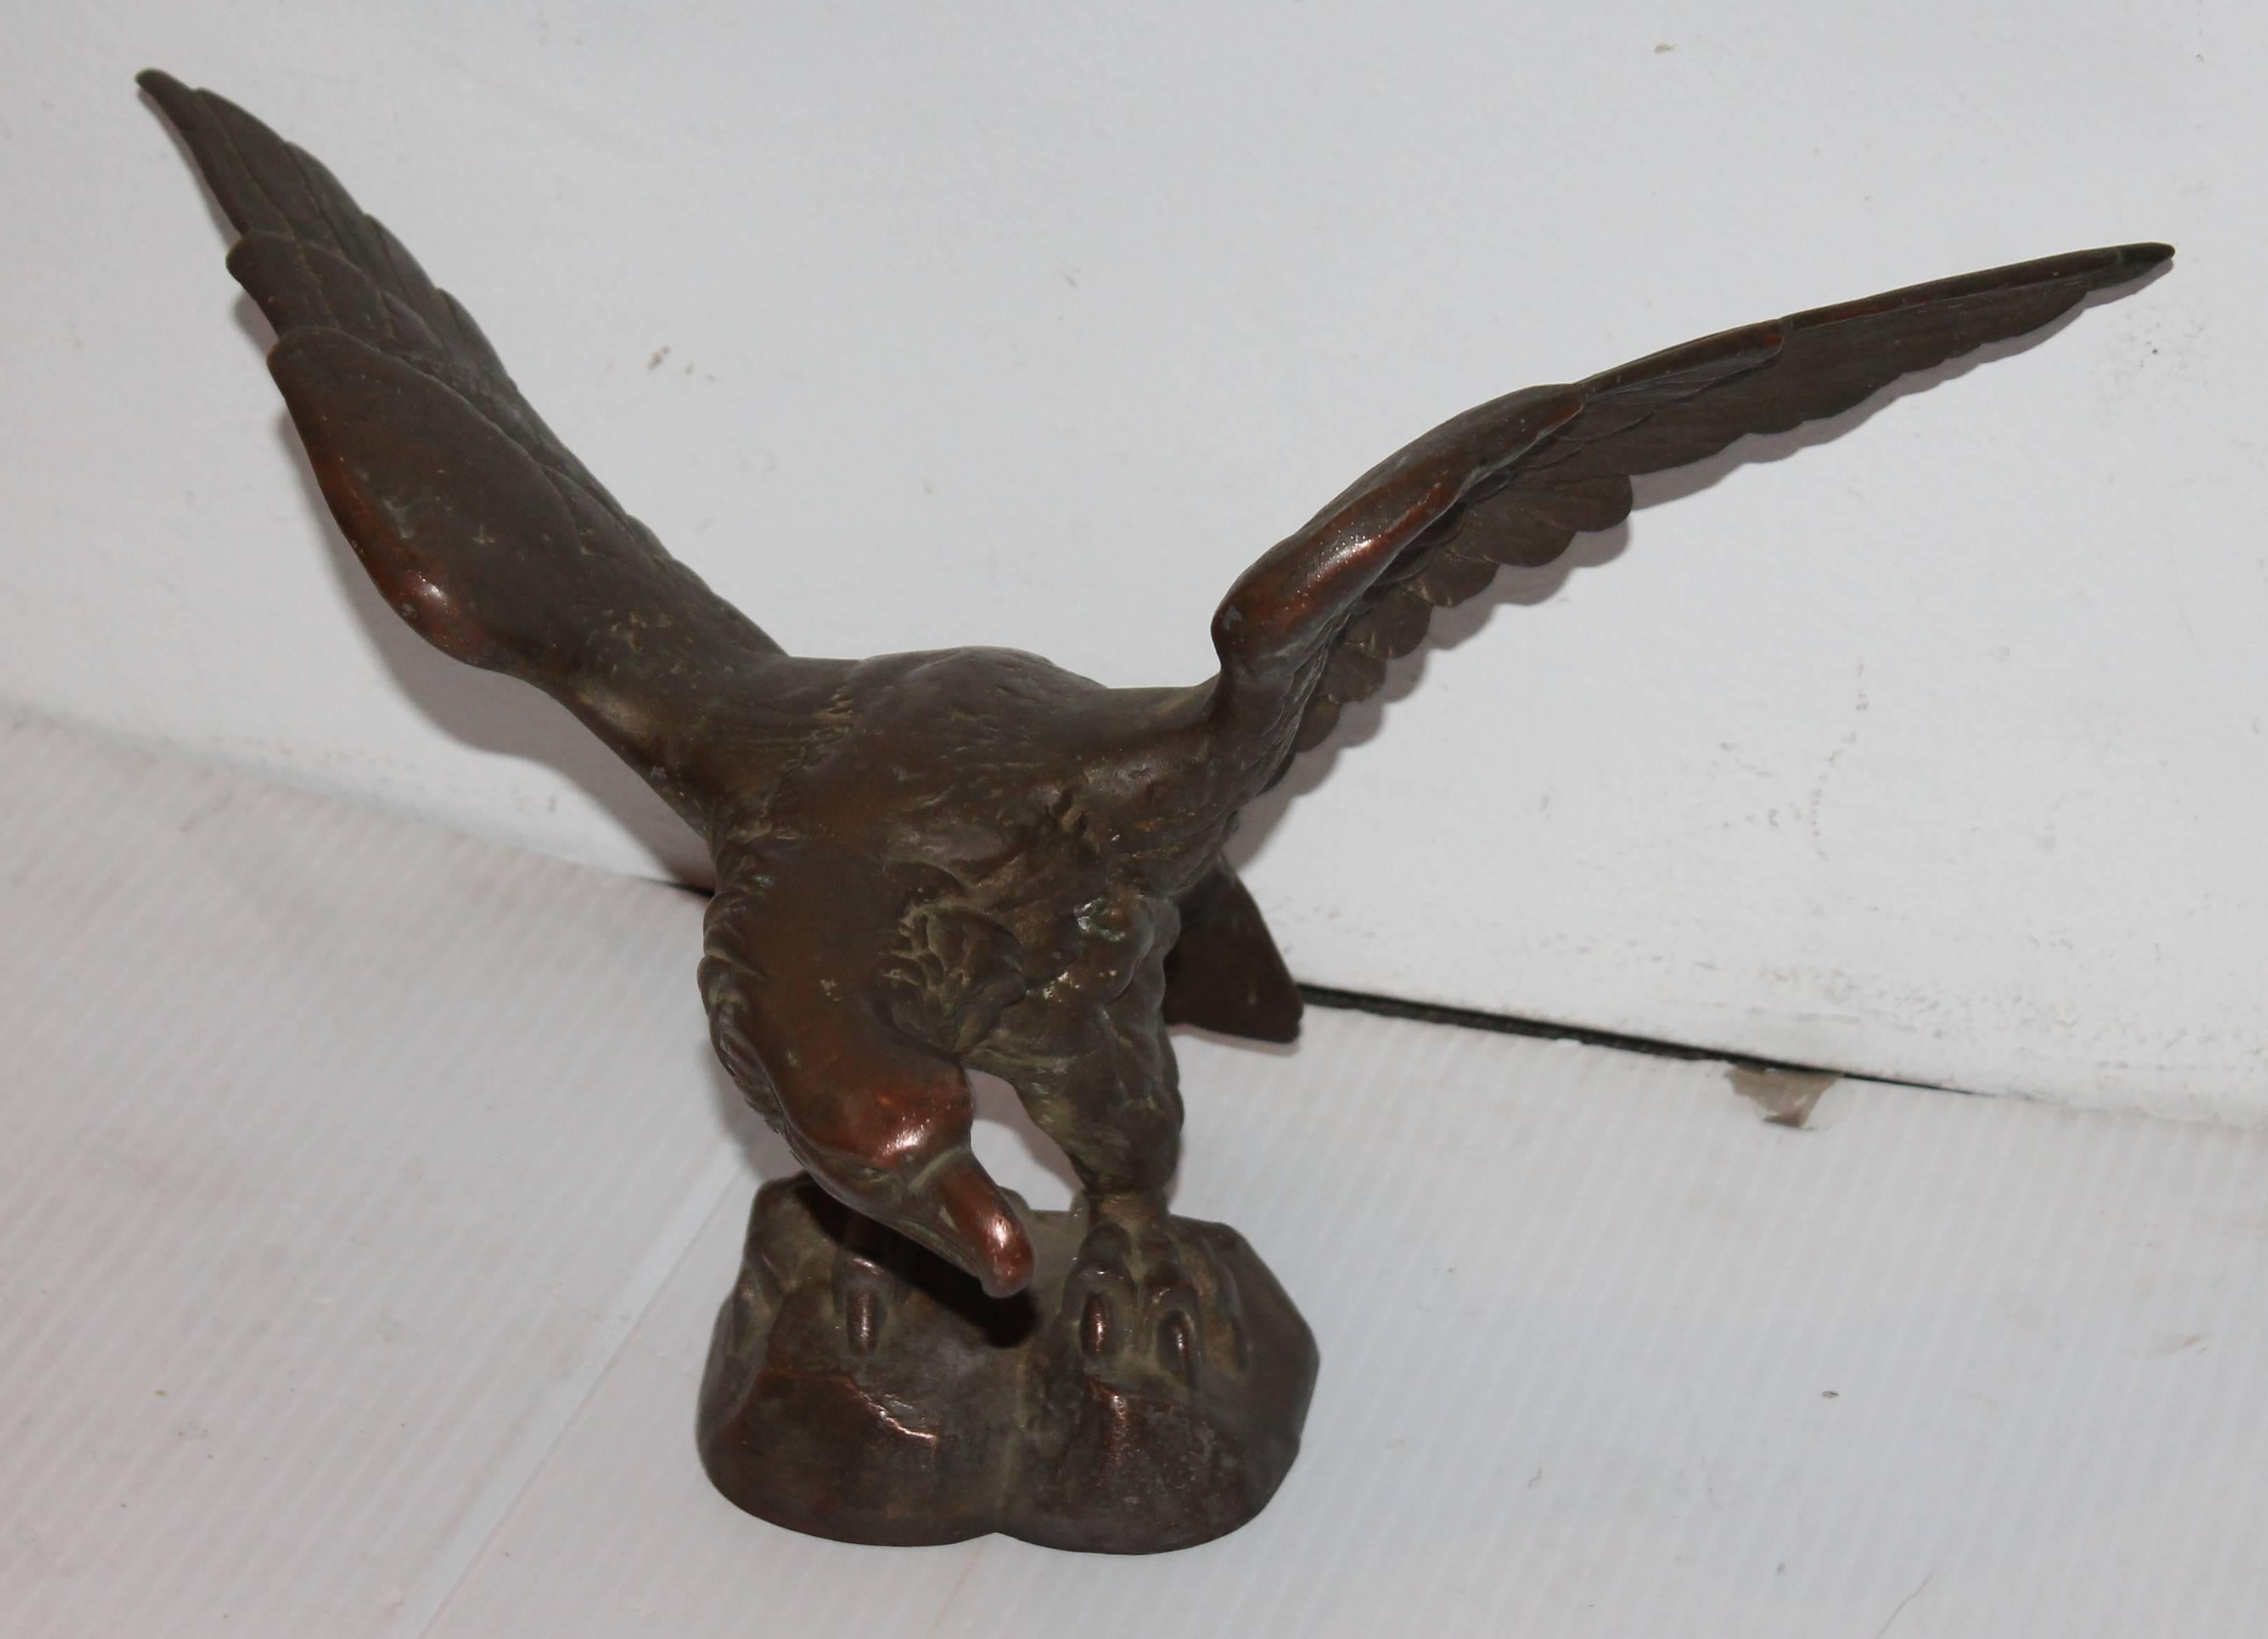 This eagle statue was in a lobby of an old Post Office from back east. It is a molded bronze 19th century heavy eagle. The condition is very good with a nice mellow patina.